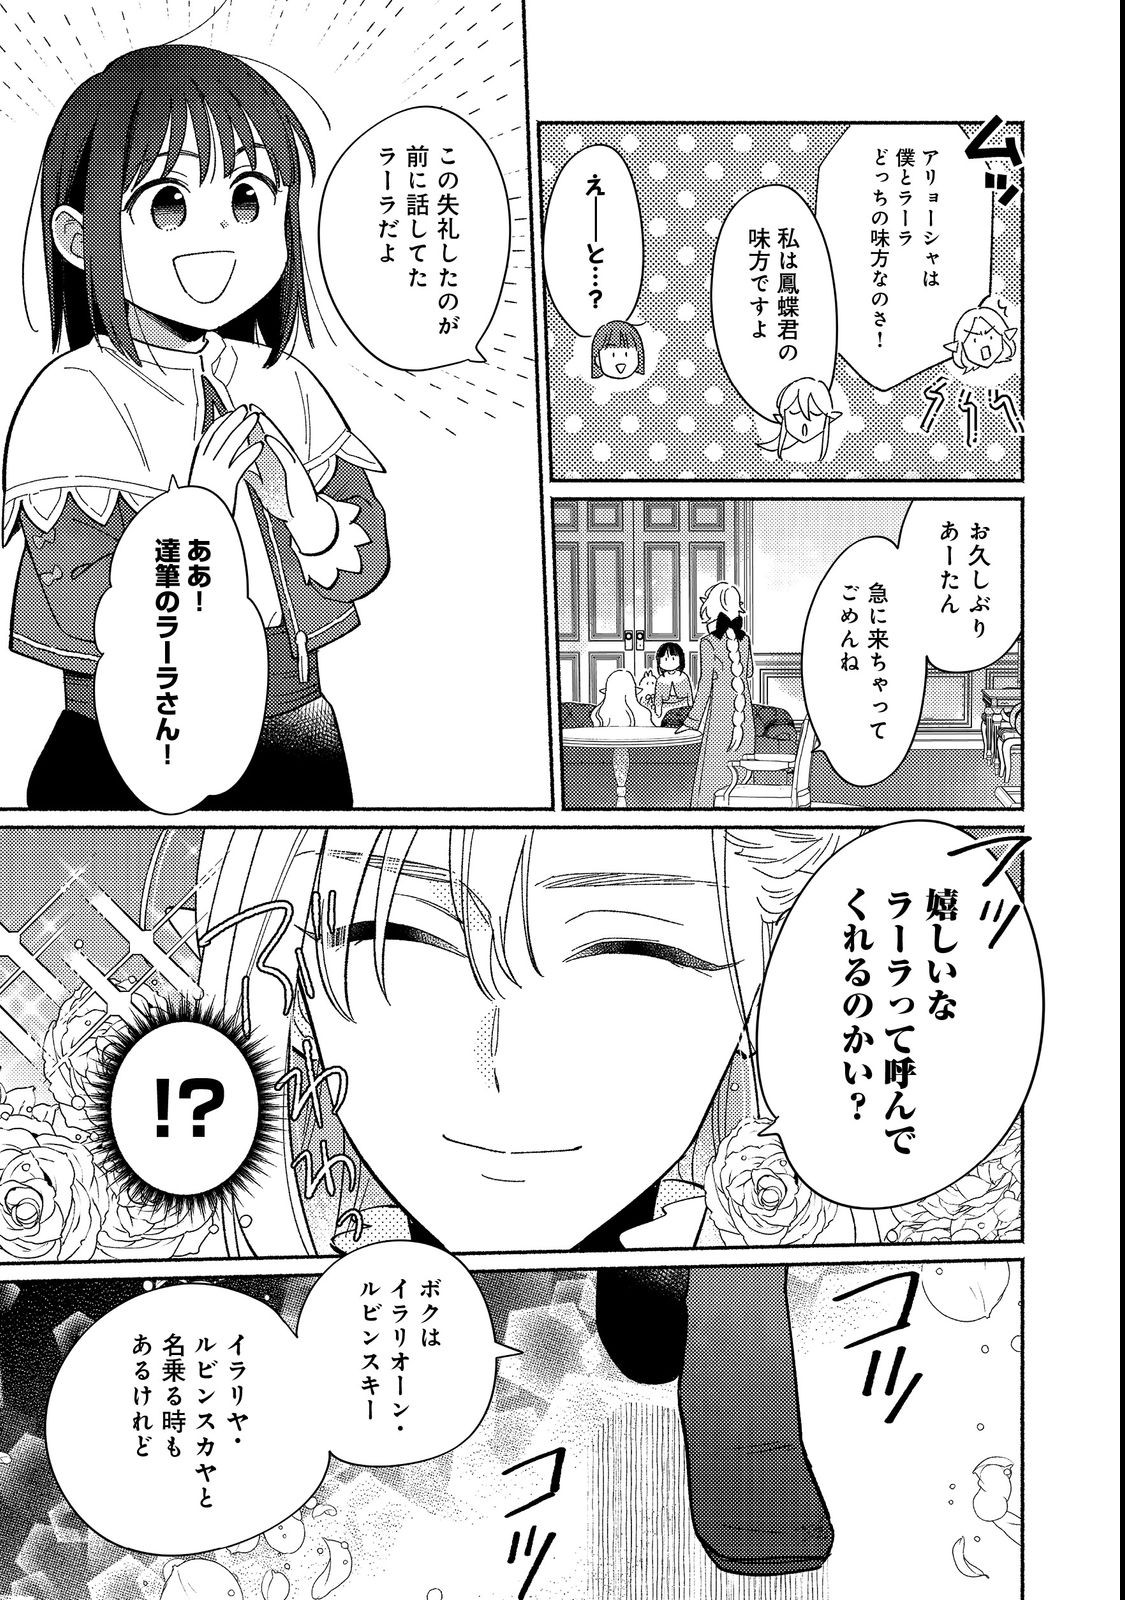 I’m the White Pig Nobleman 第17.1話 - Page 7